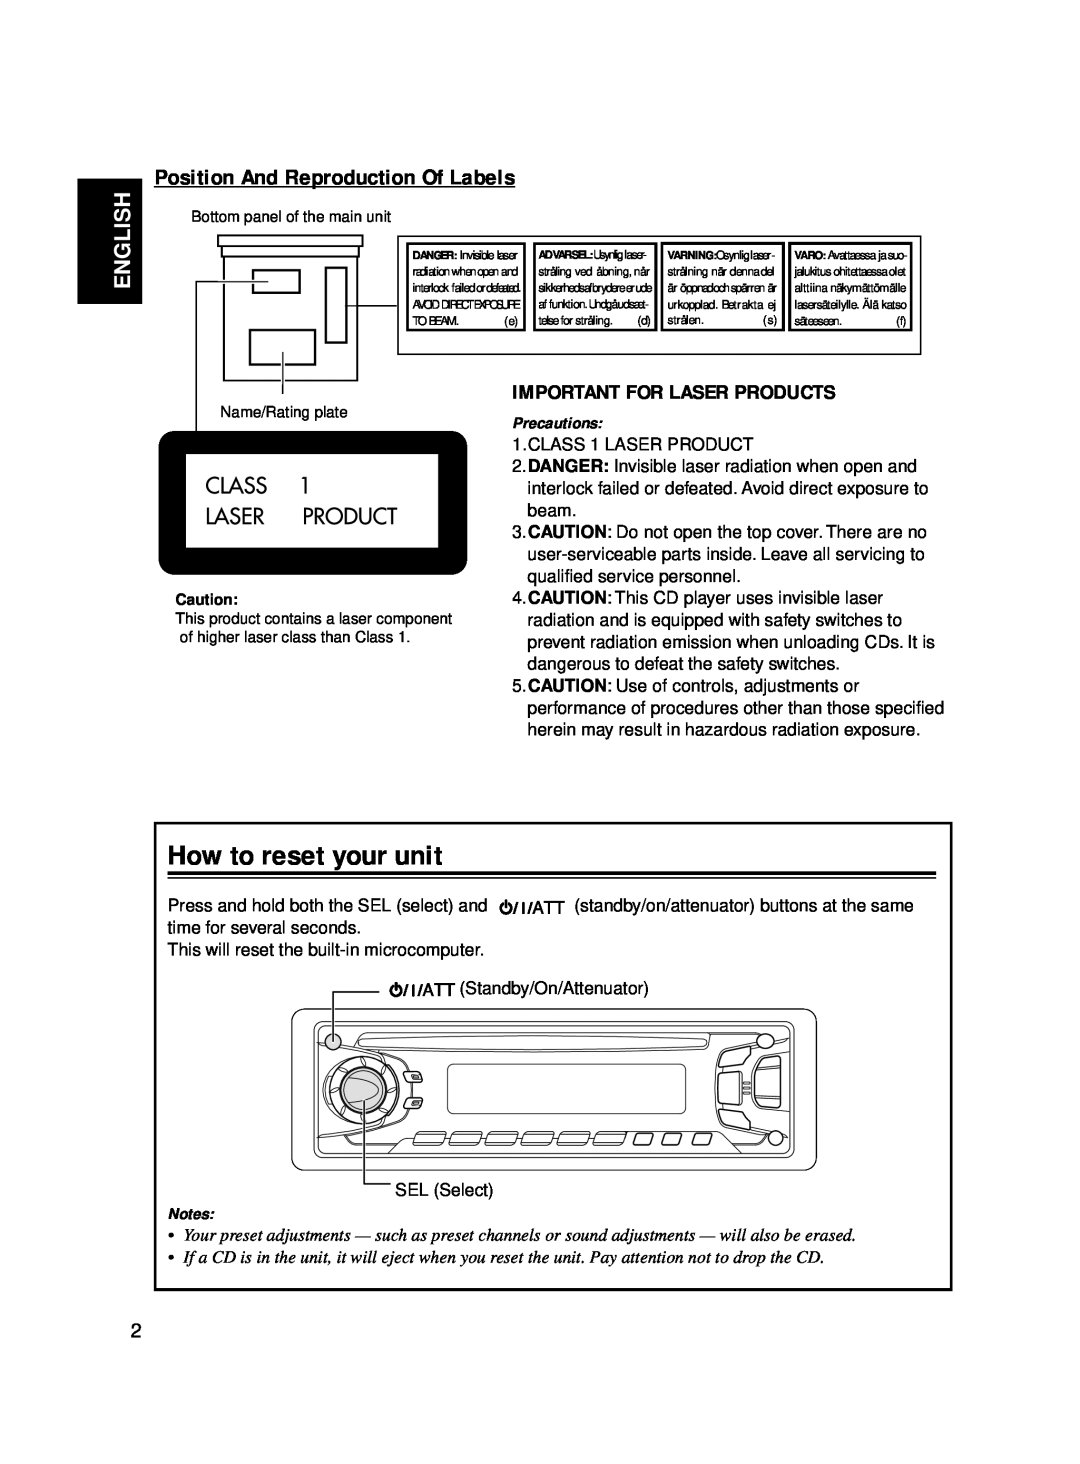 JVC KD-S811R manual How to reset your unit, Position And Reproduction Of Labels, English, Important For Laser Products 